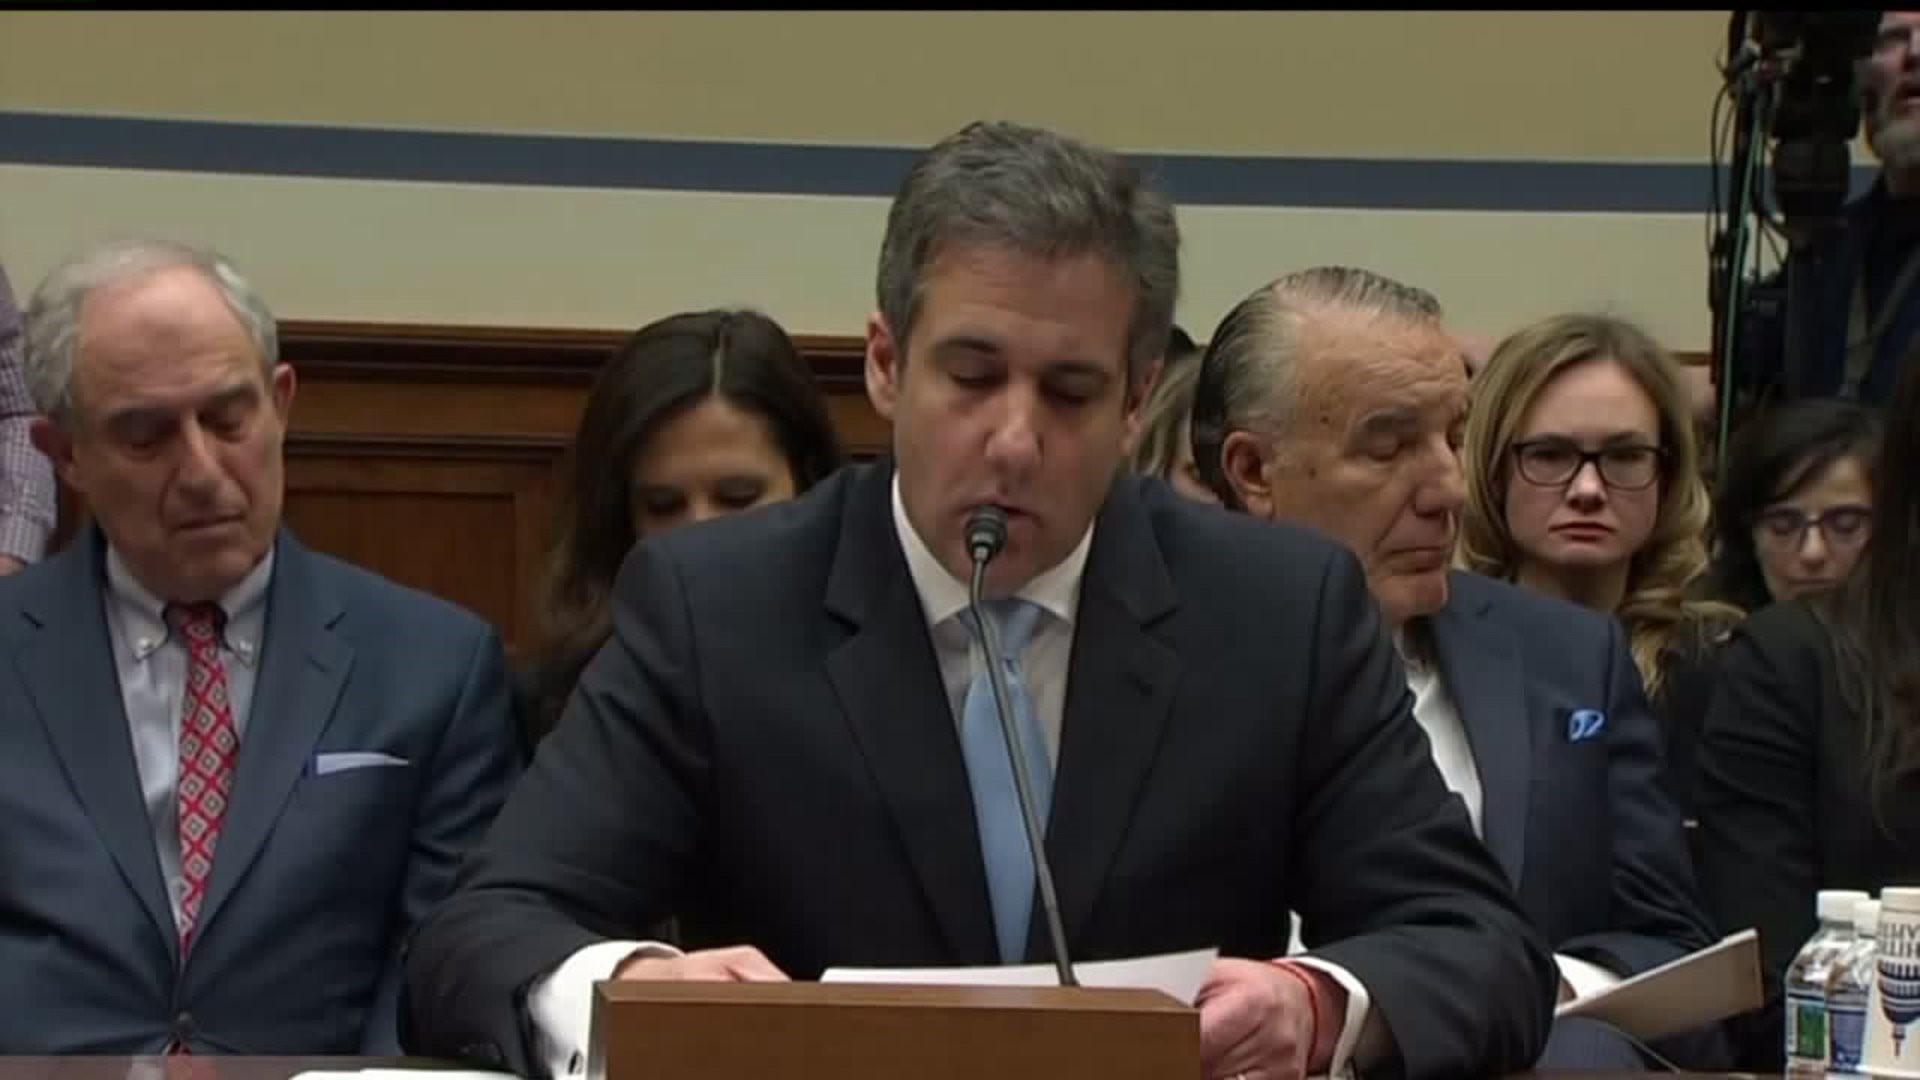 Michael Cohen to report to prison May 6th